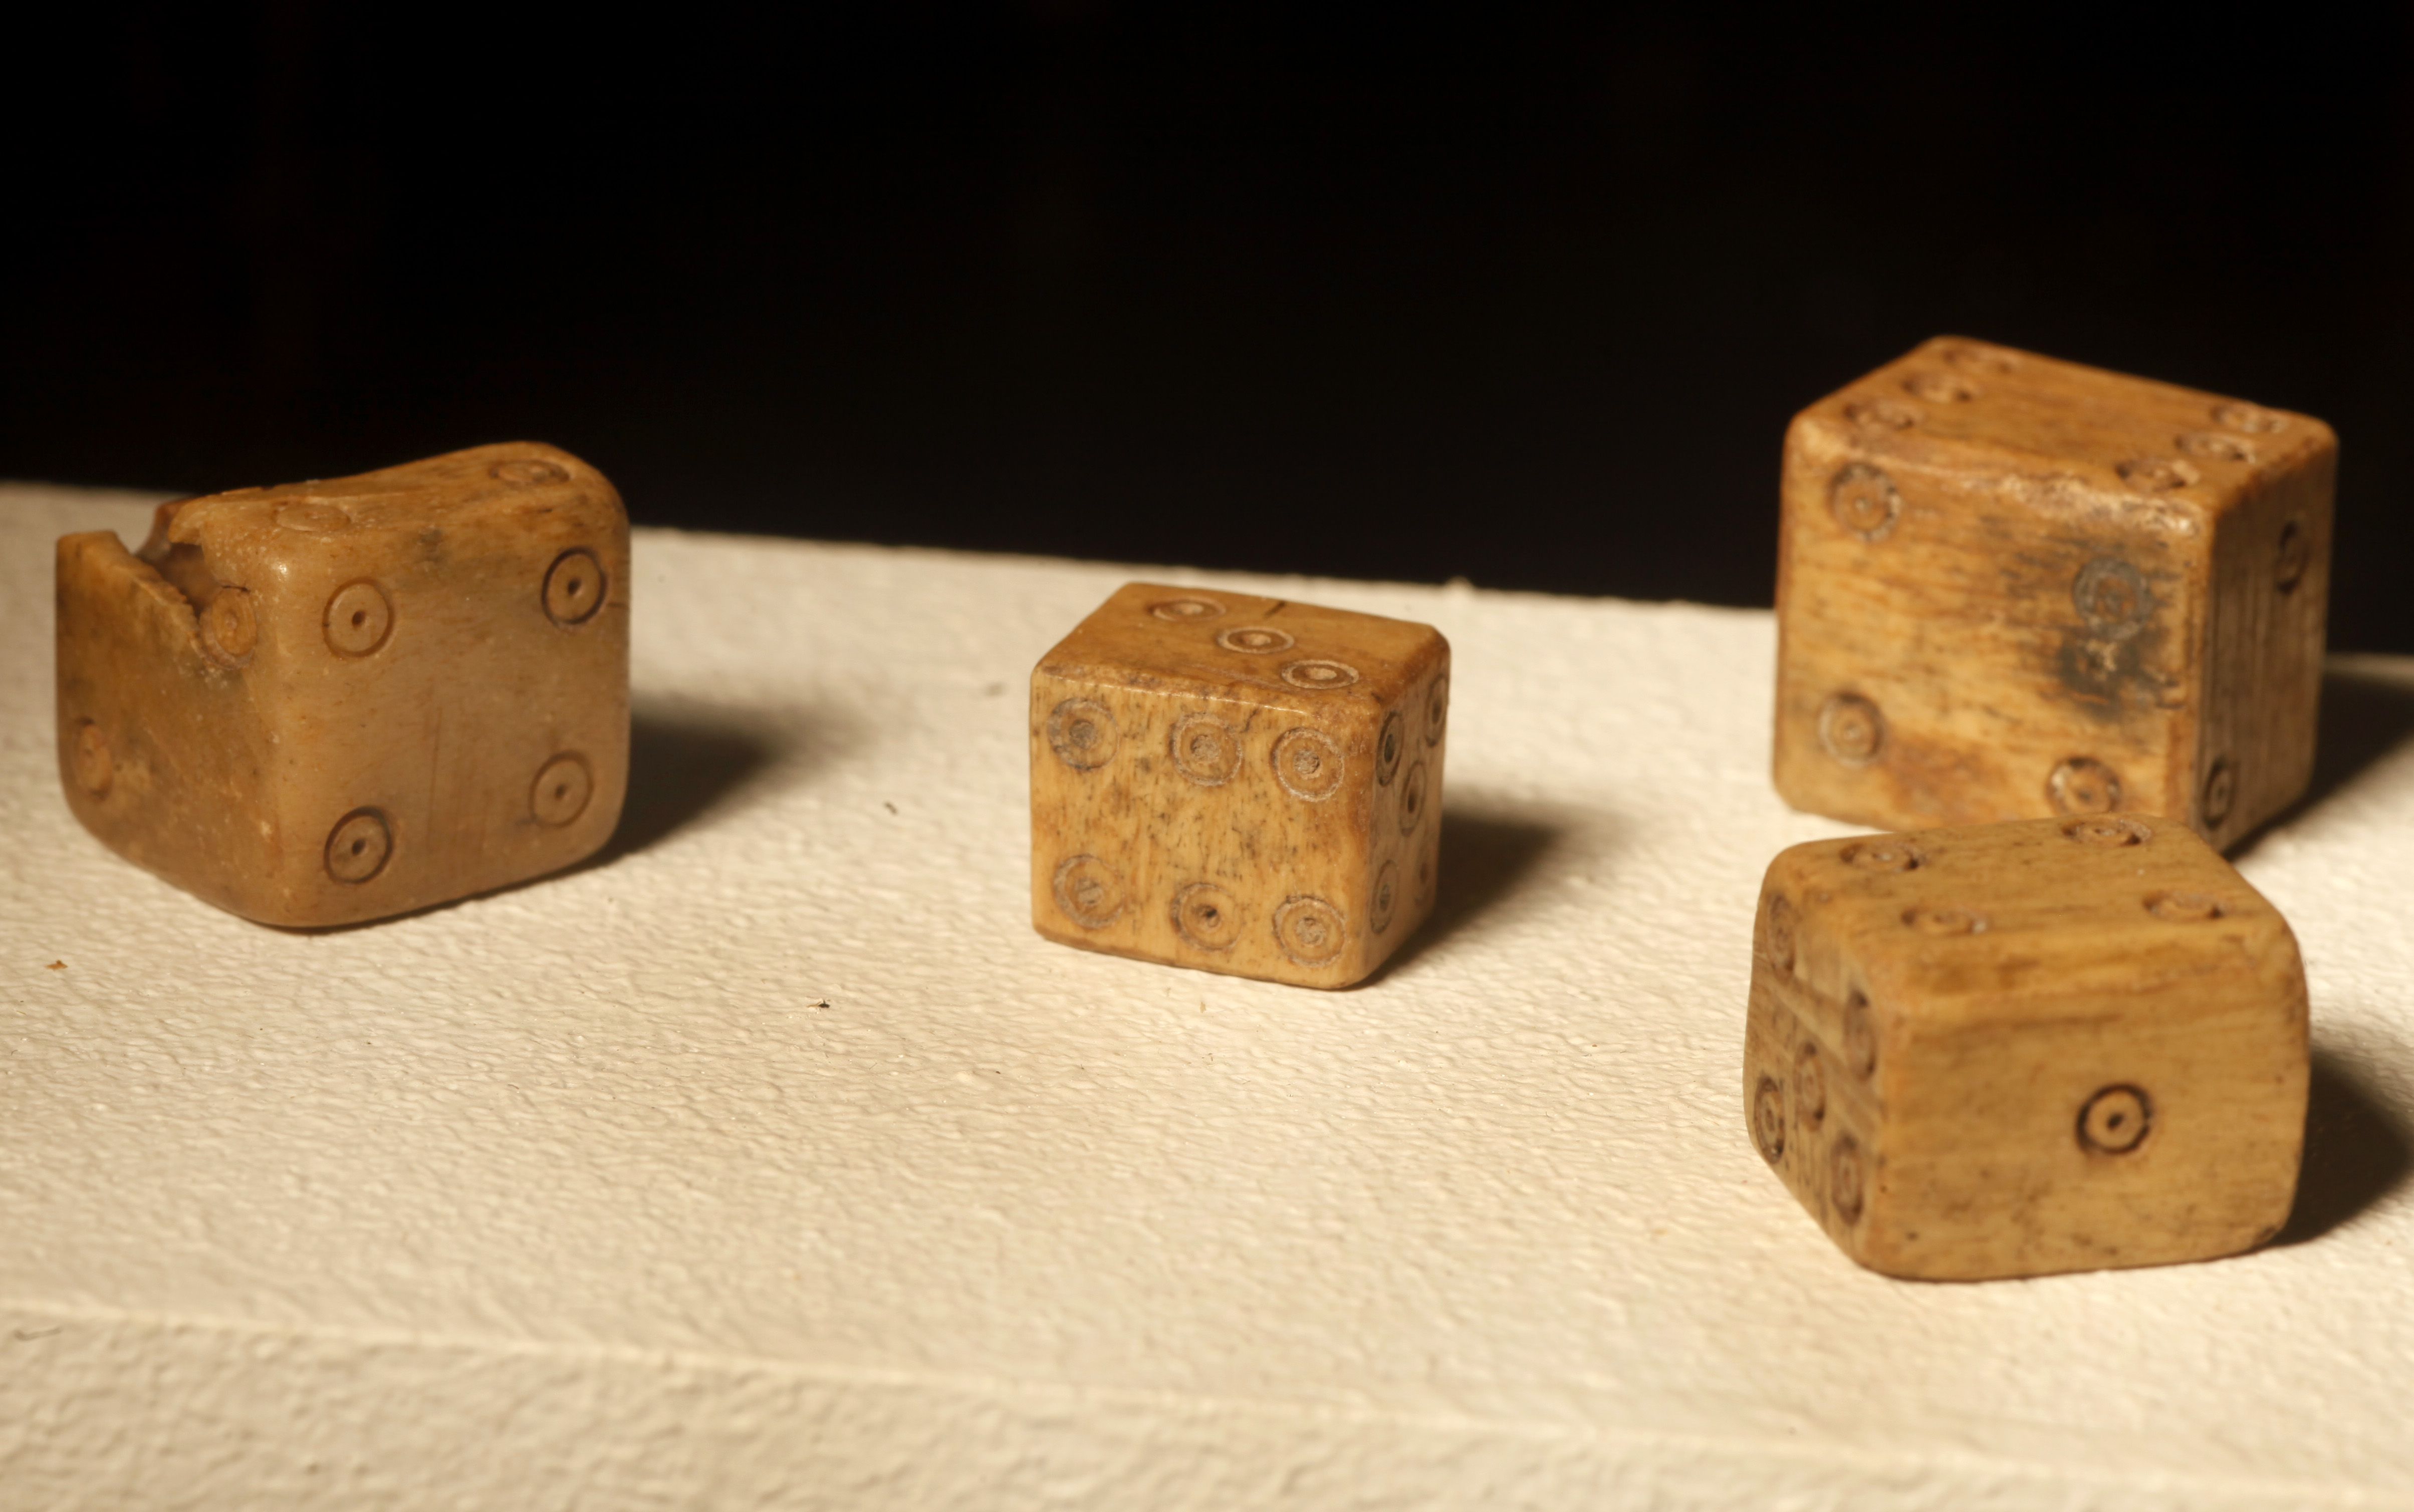 Why Ancient Romans Used Lopsided Dice